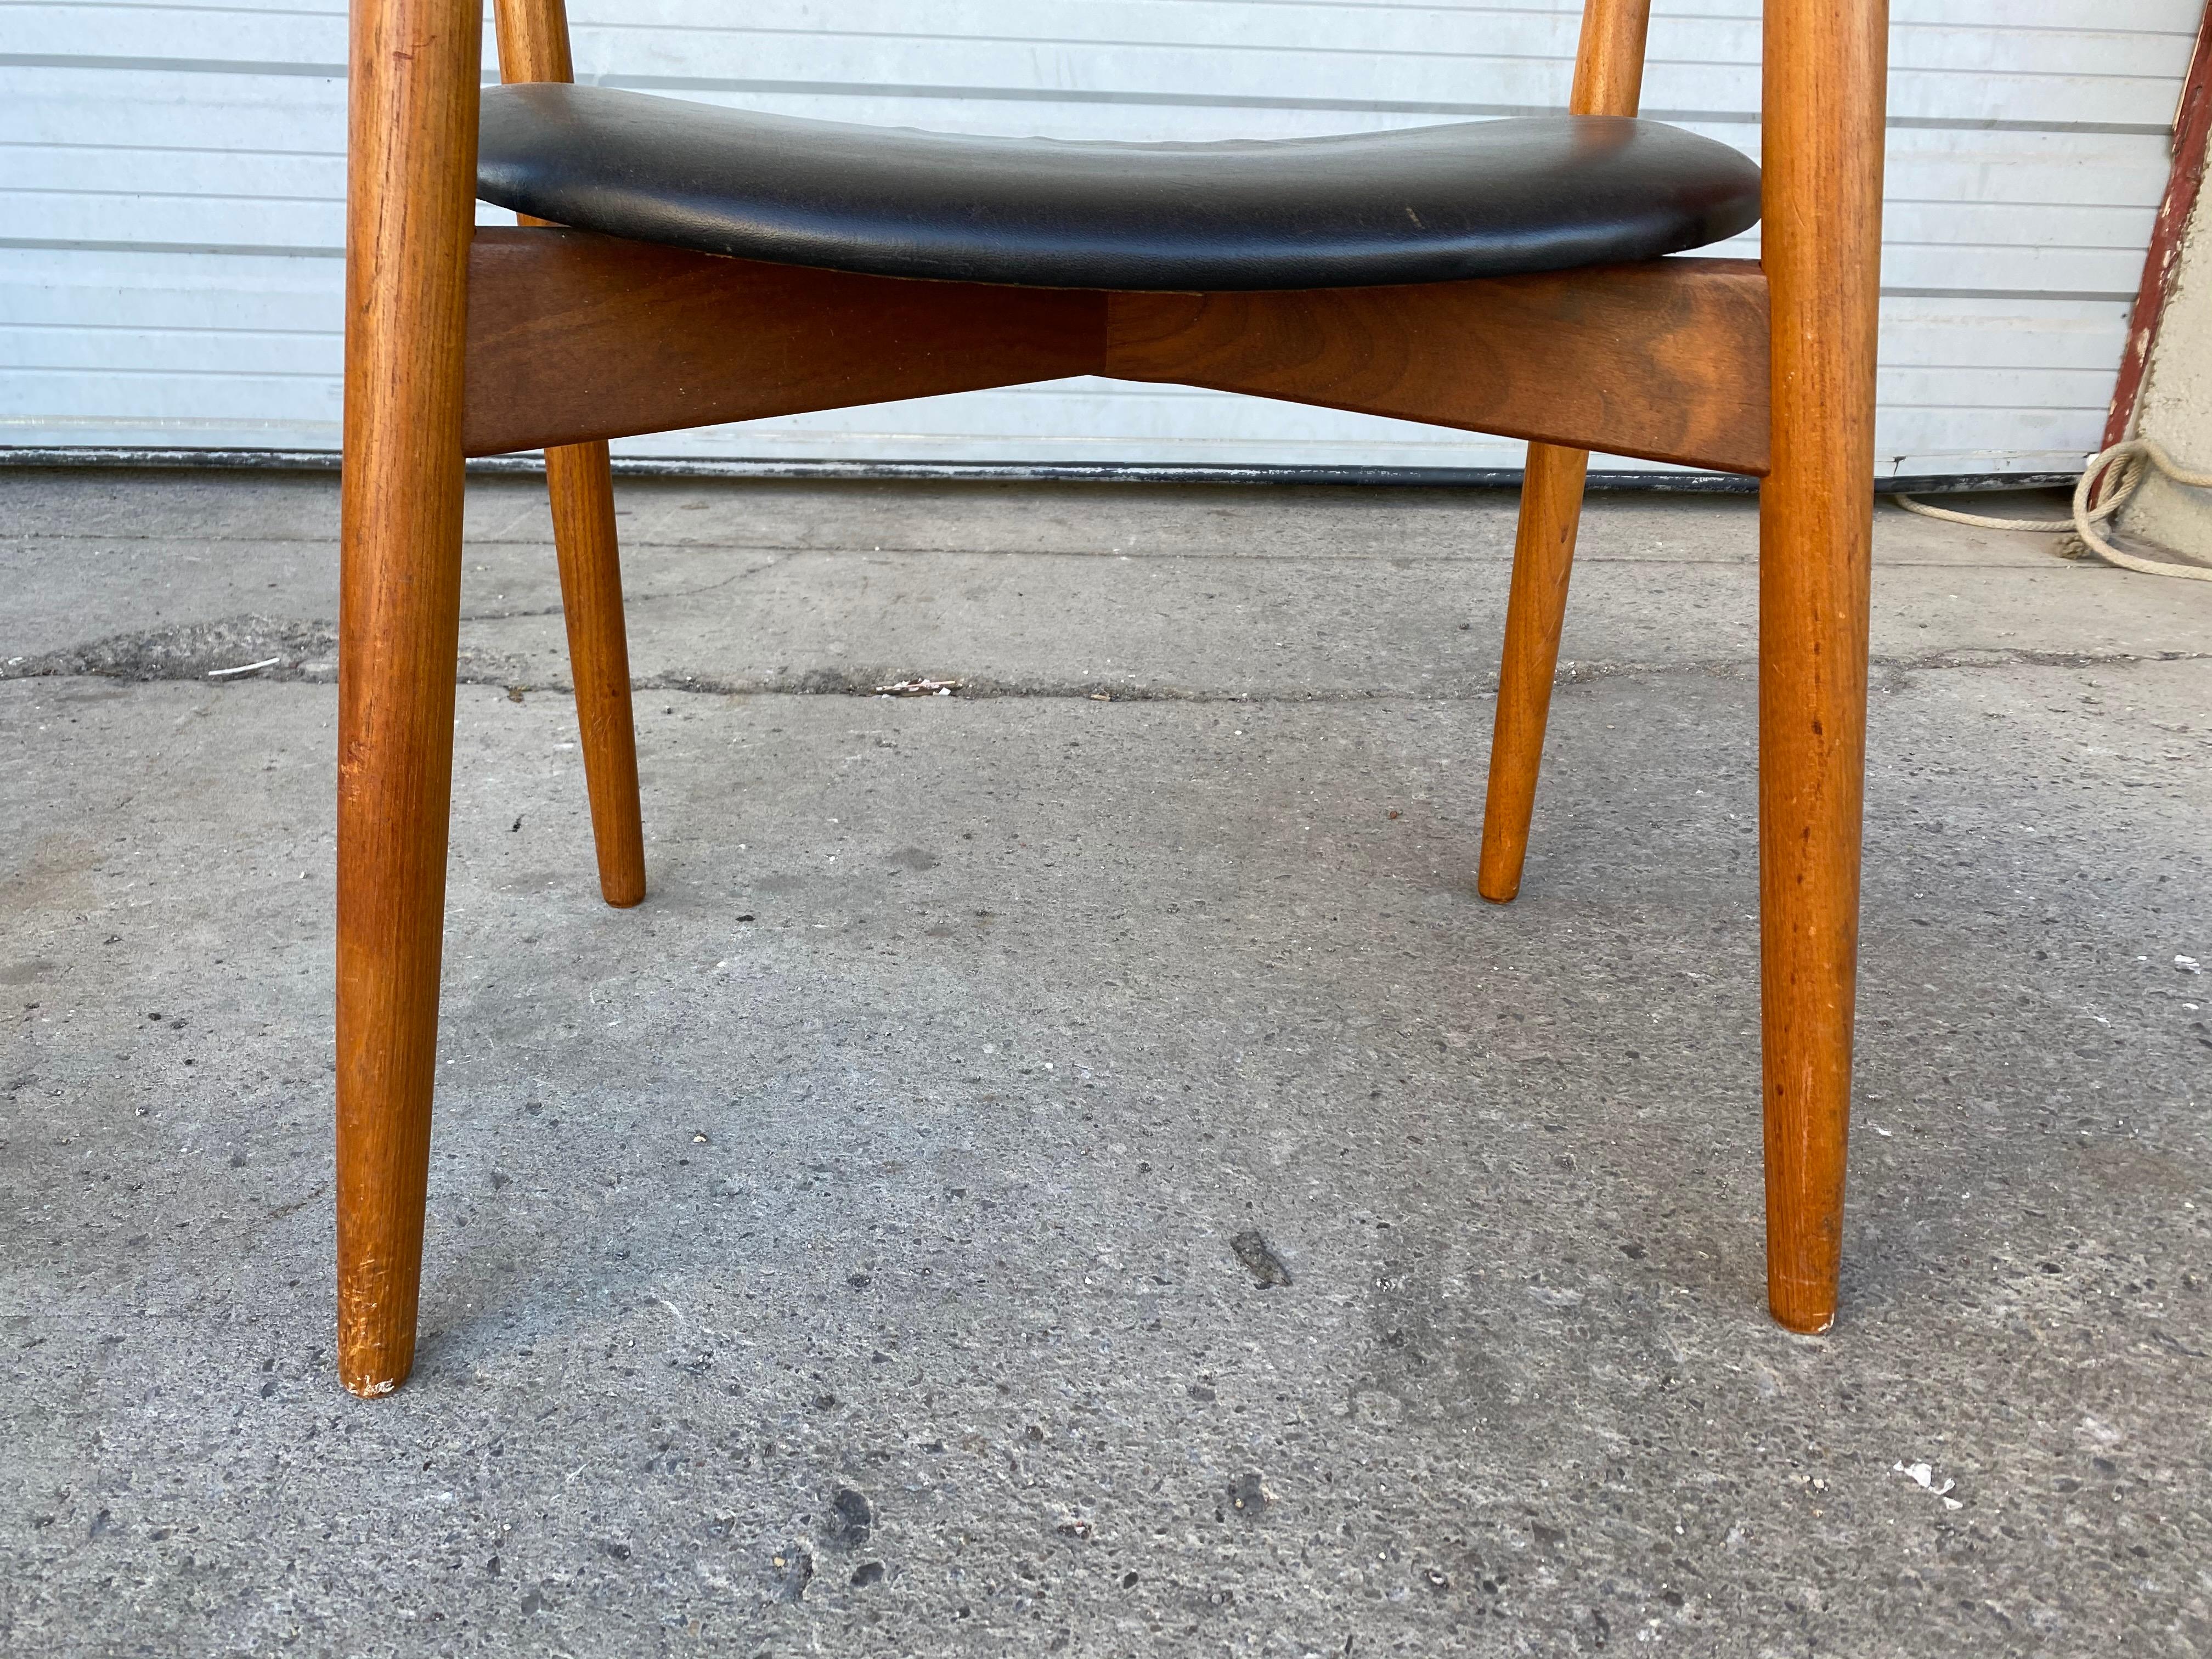 Solid teak frames, seat leather upholstered, model 59. Designed in 1960 by Harry Ostergaard for Randers Møbelfabrik. Superior quality and construction, extremely comfortable, amazing design. Stamped under seats.